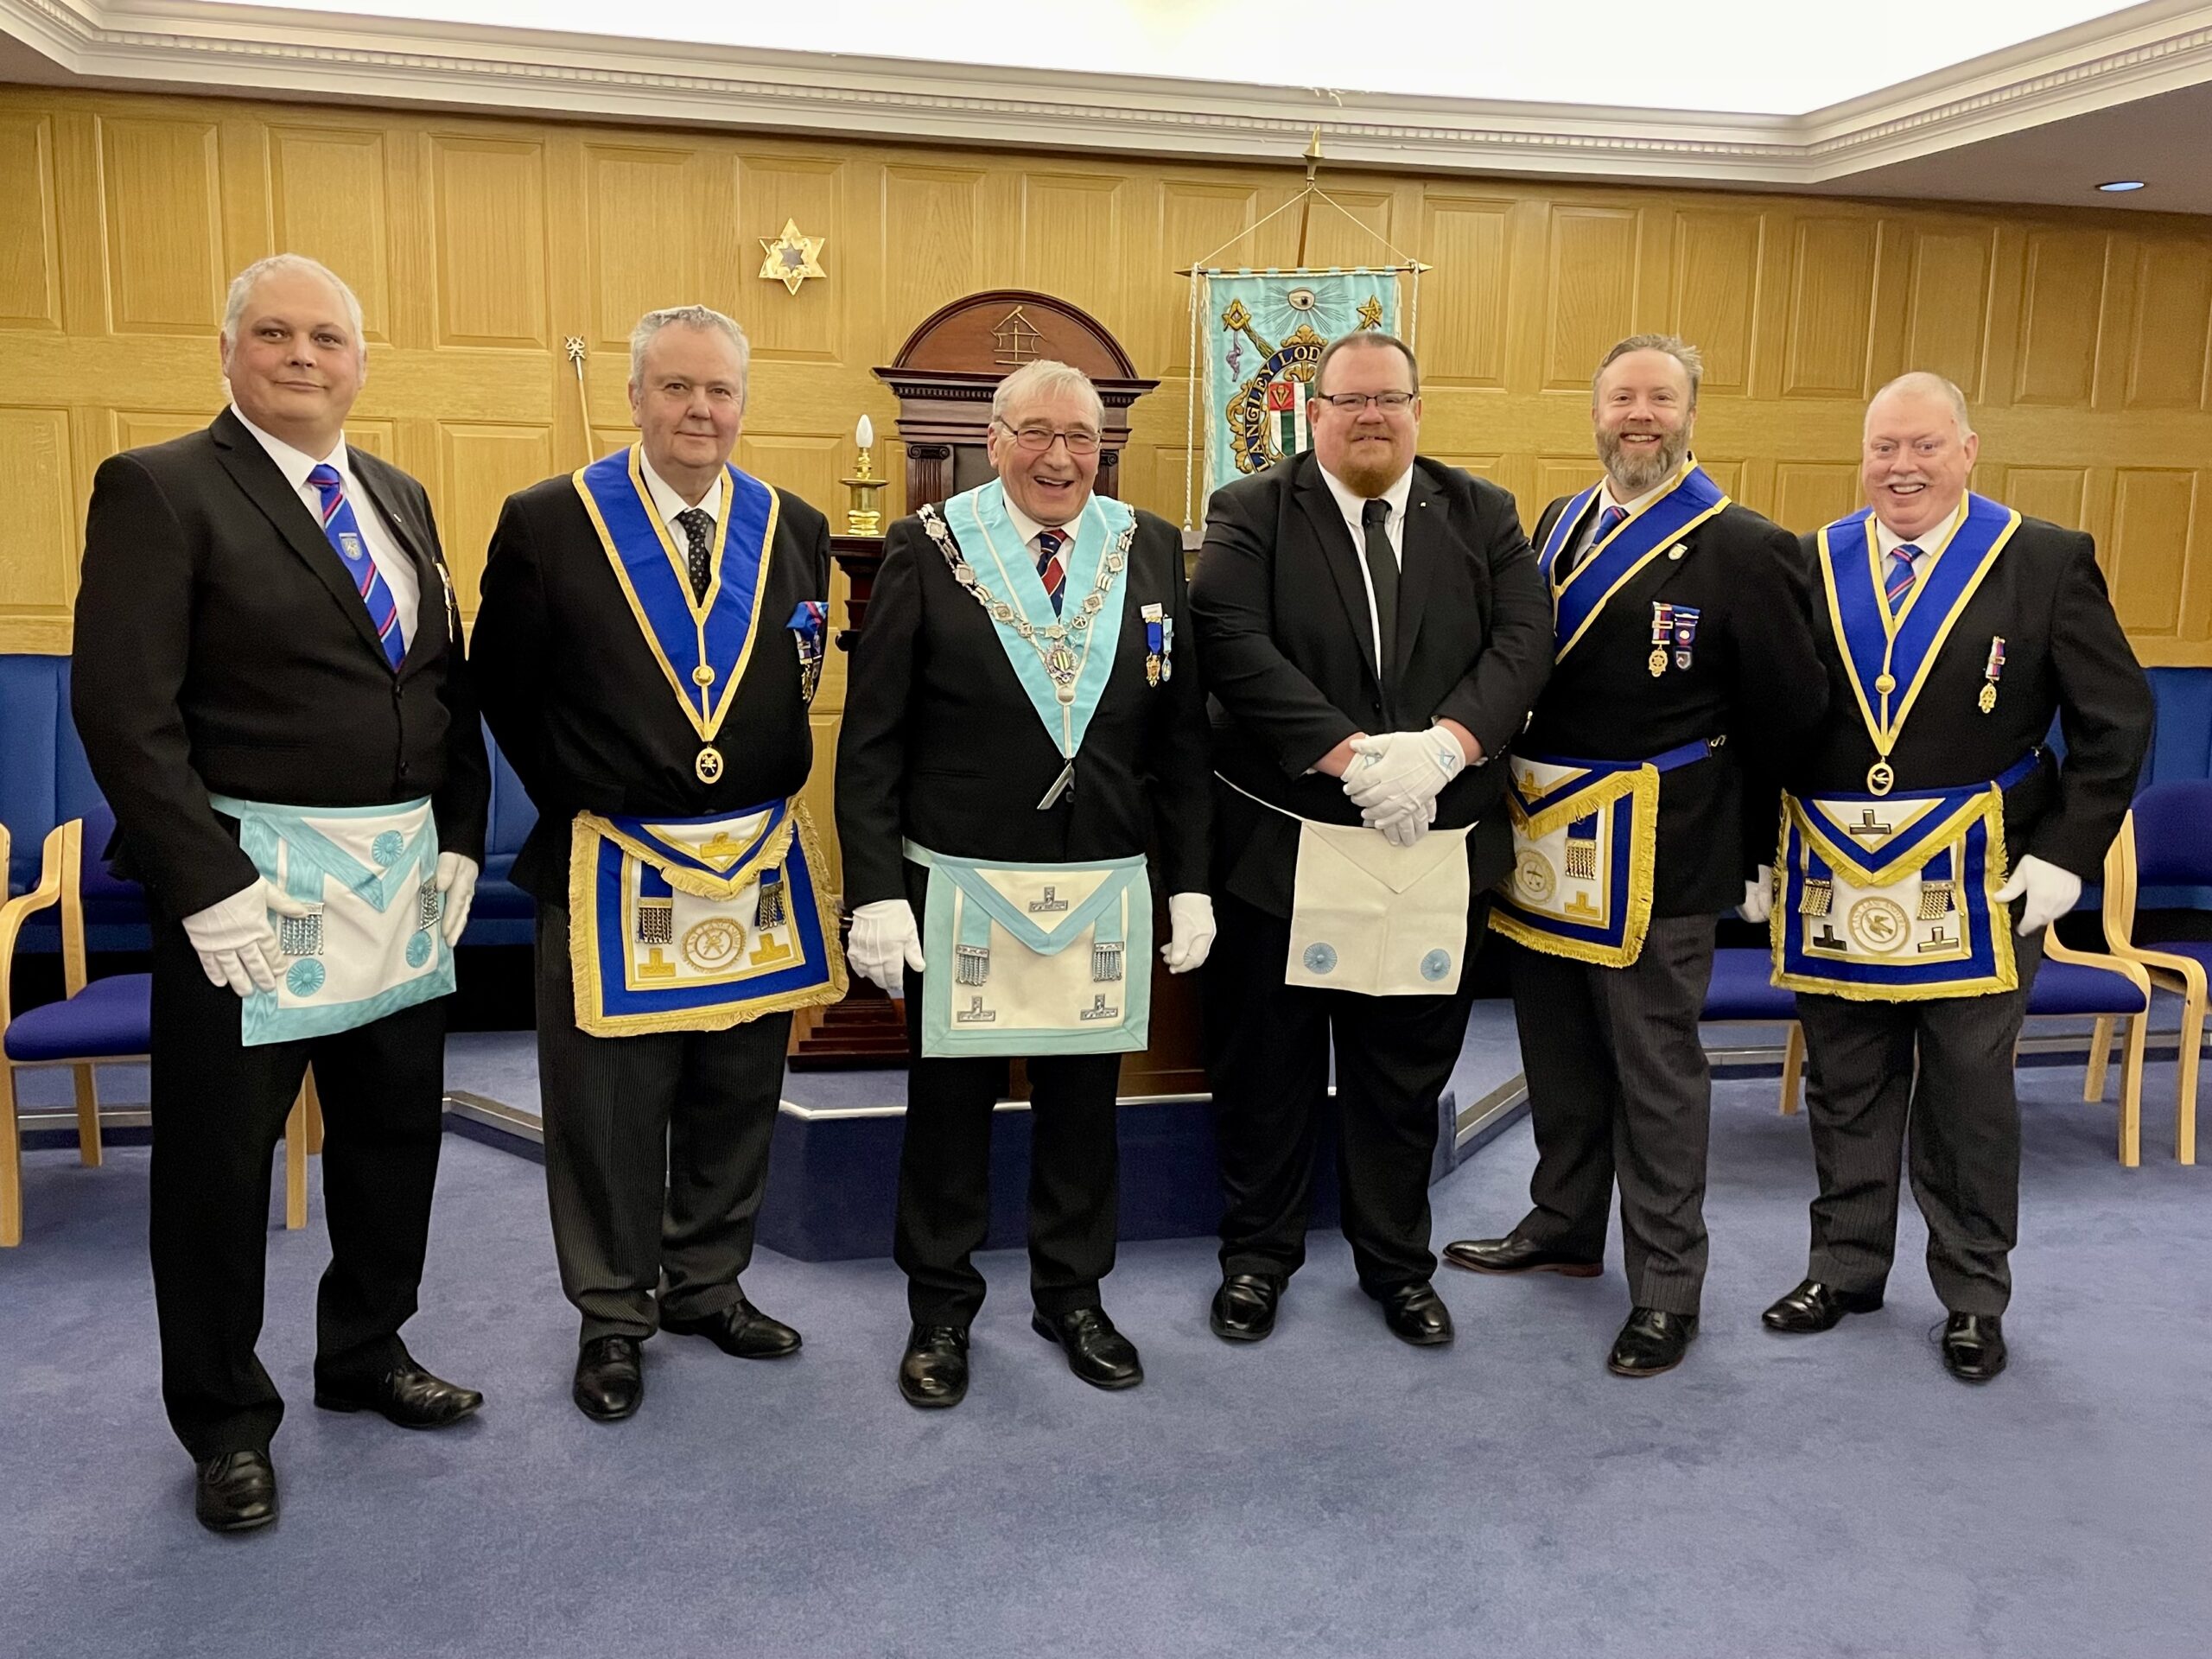 Langley Lodge 3989 – 2nd Degree Ceremony